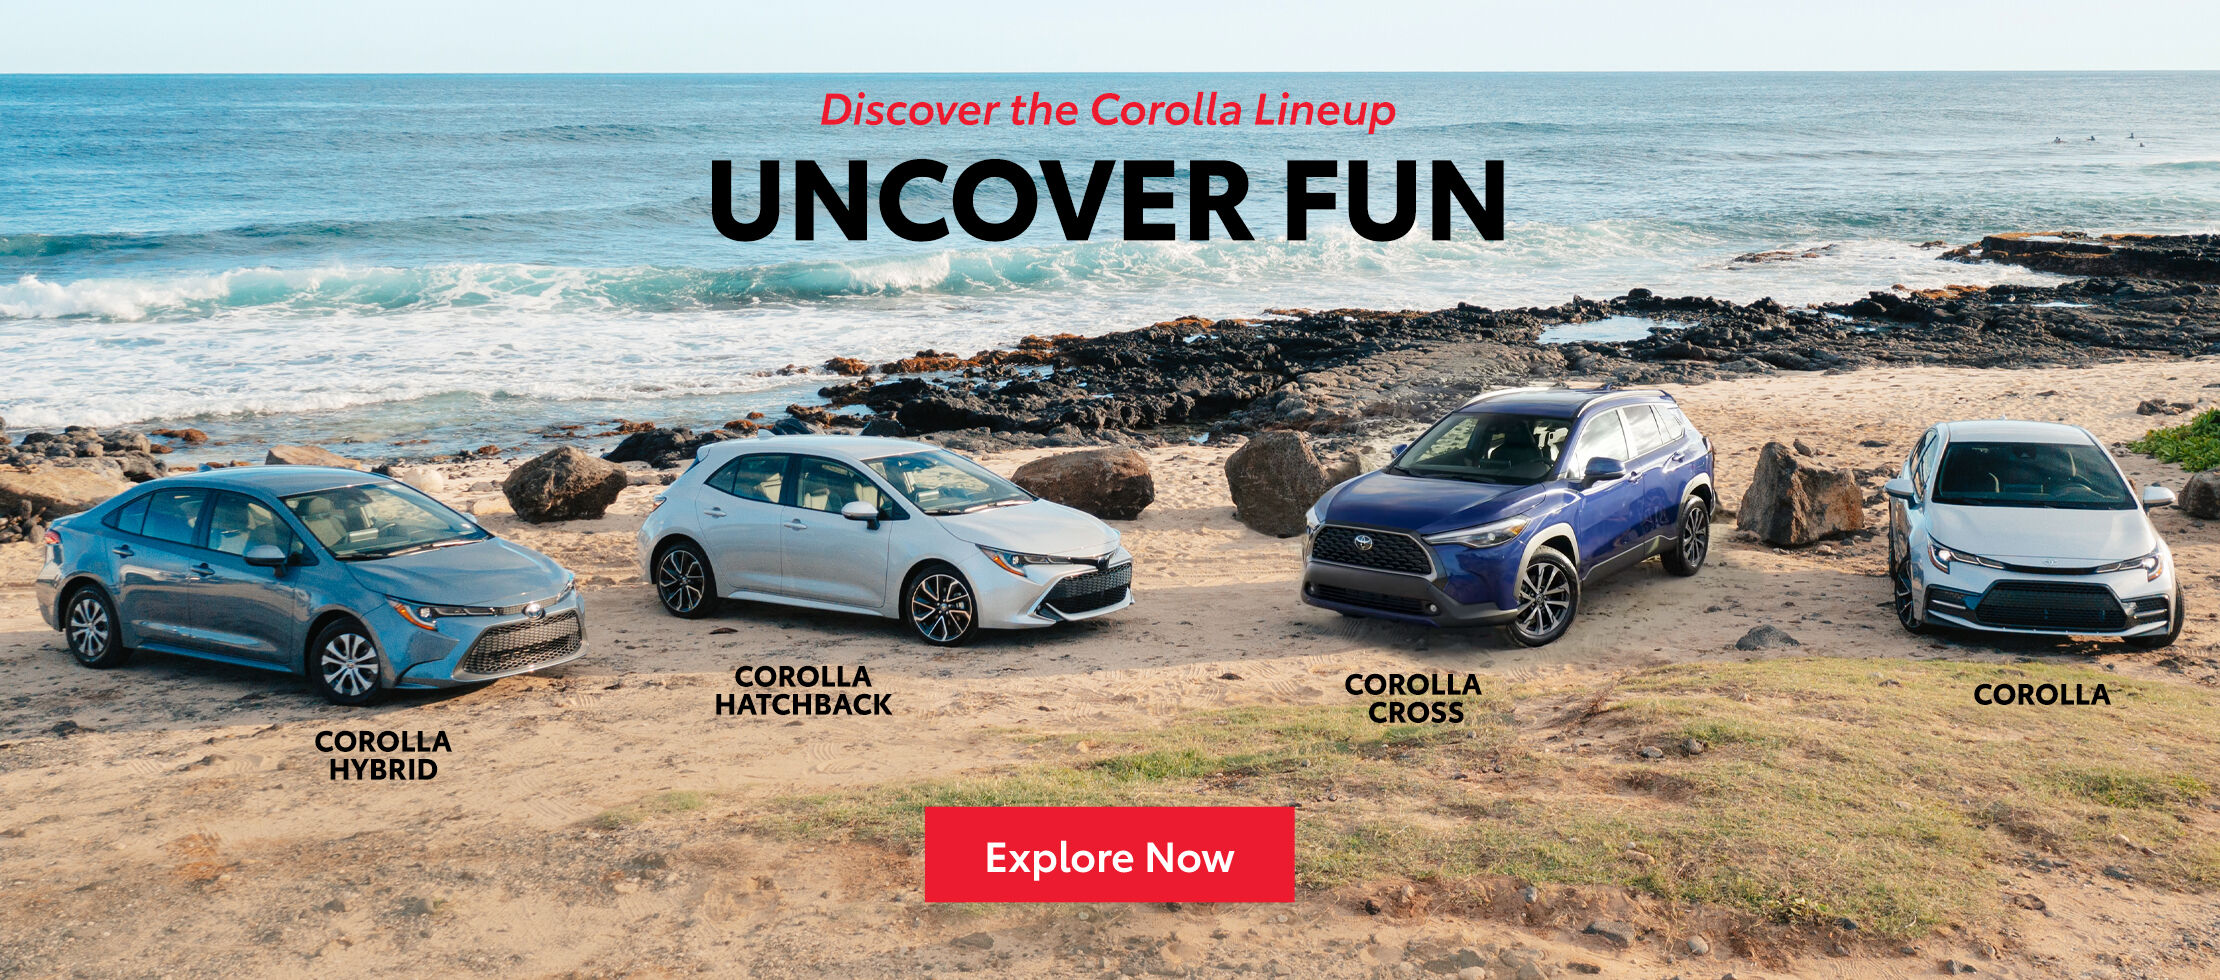 The 2022 Corolla Family lineup displayed on a sandy beach.